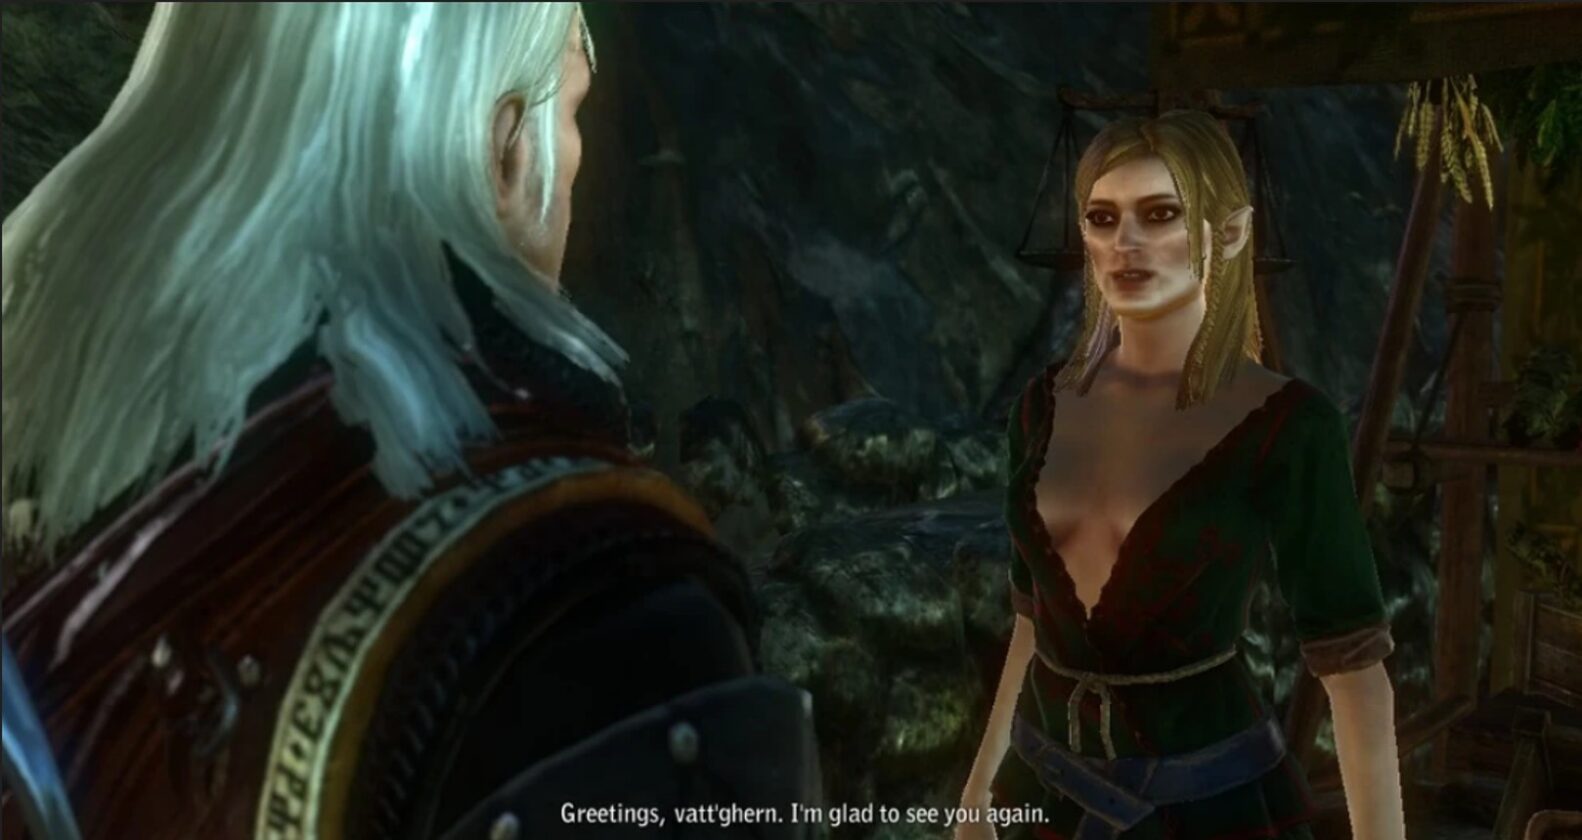 Romance Triss Merigold during the events of the first Chapter